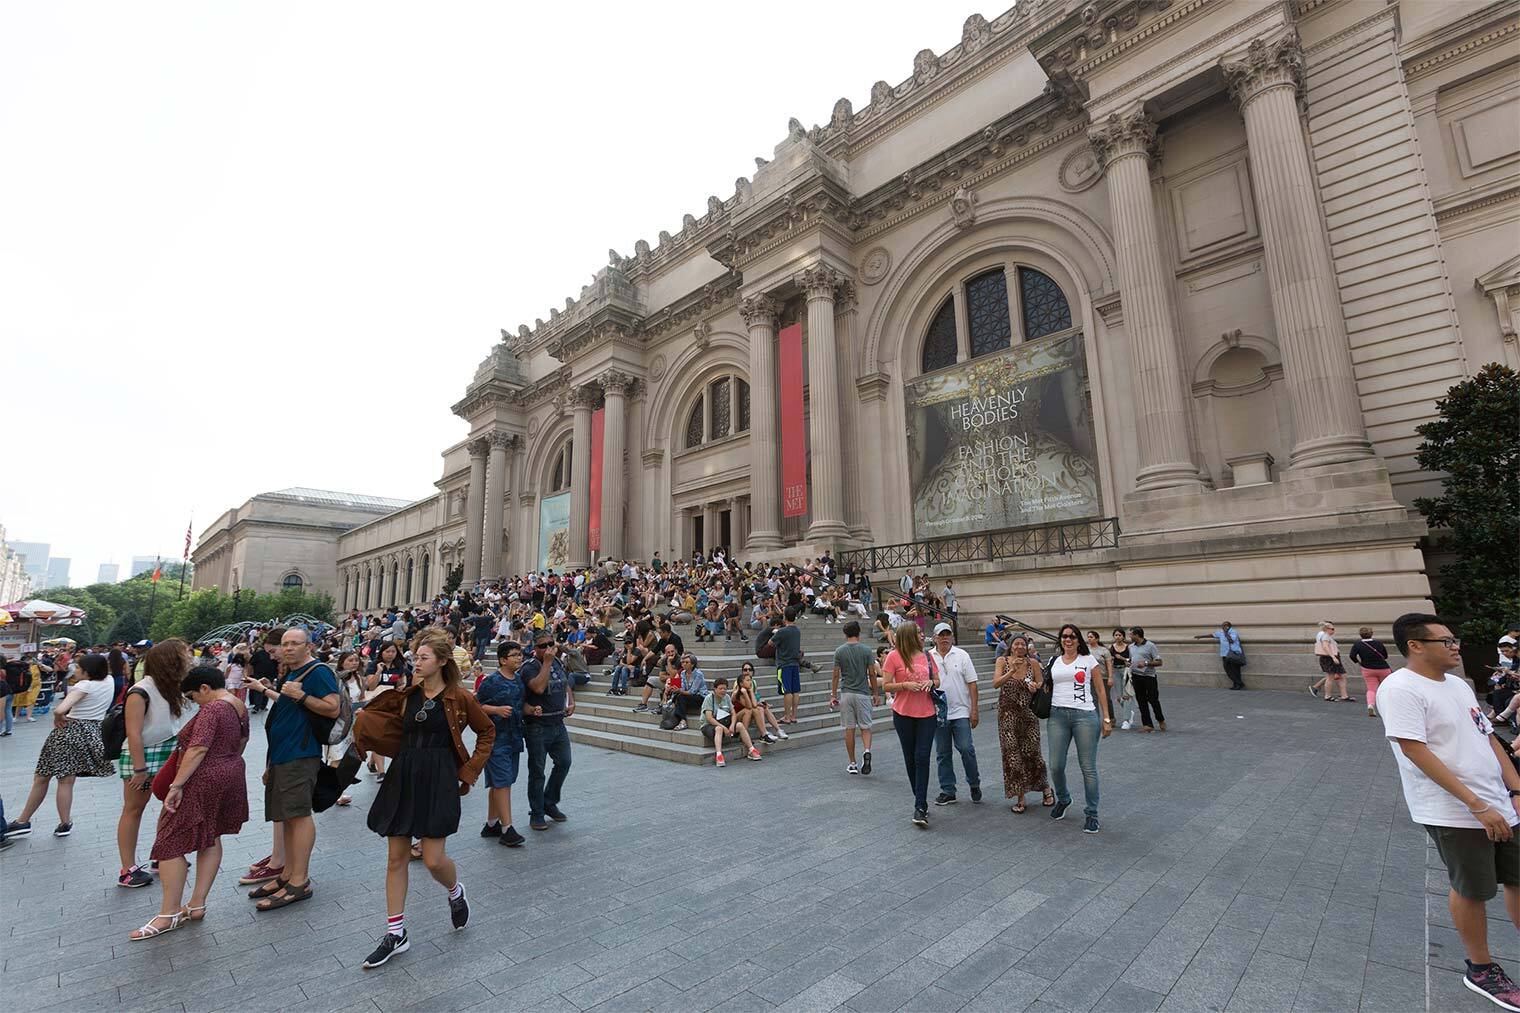 A photo of a crowd gathered in The Met's plaza